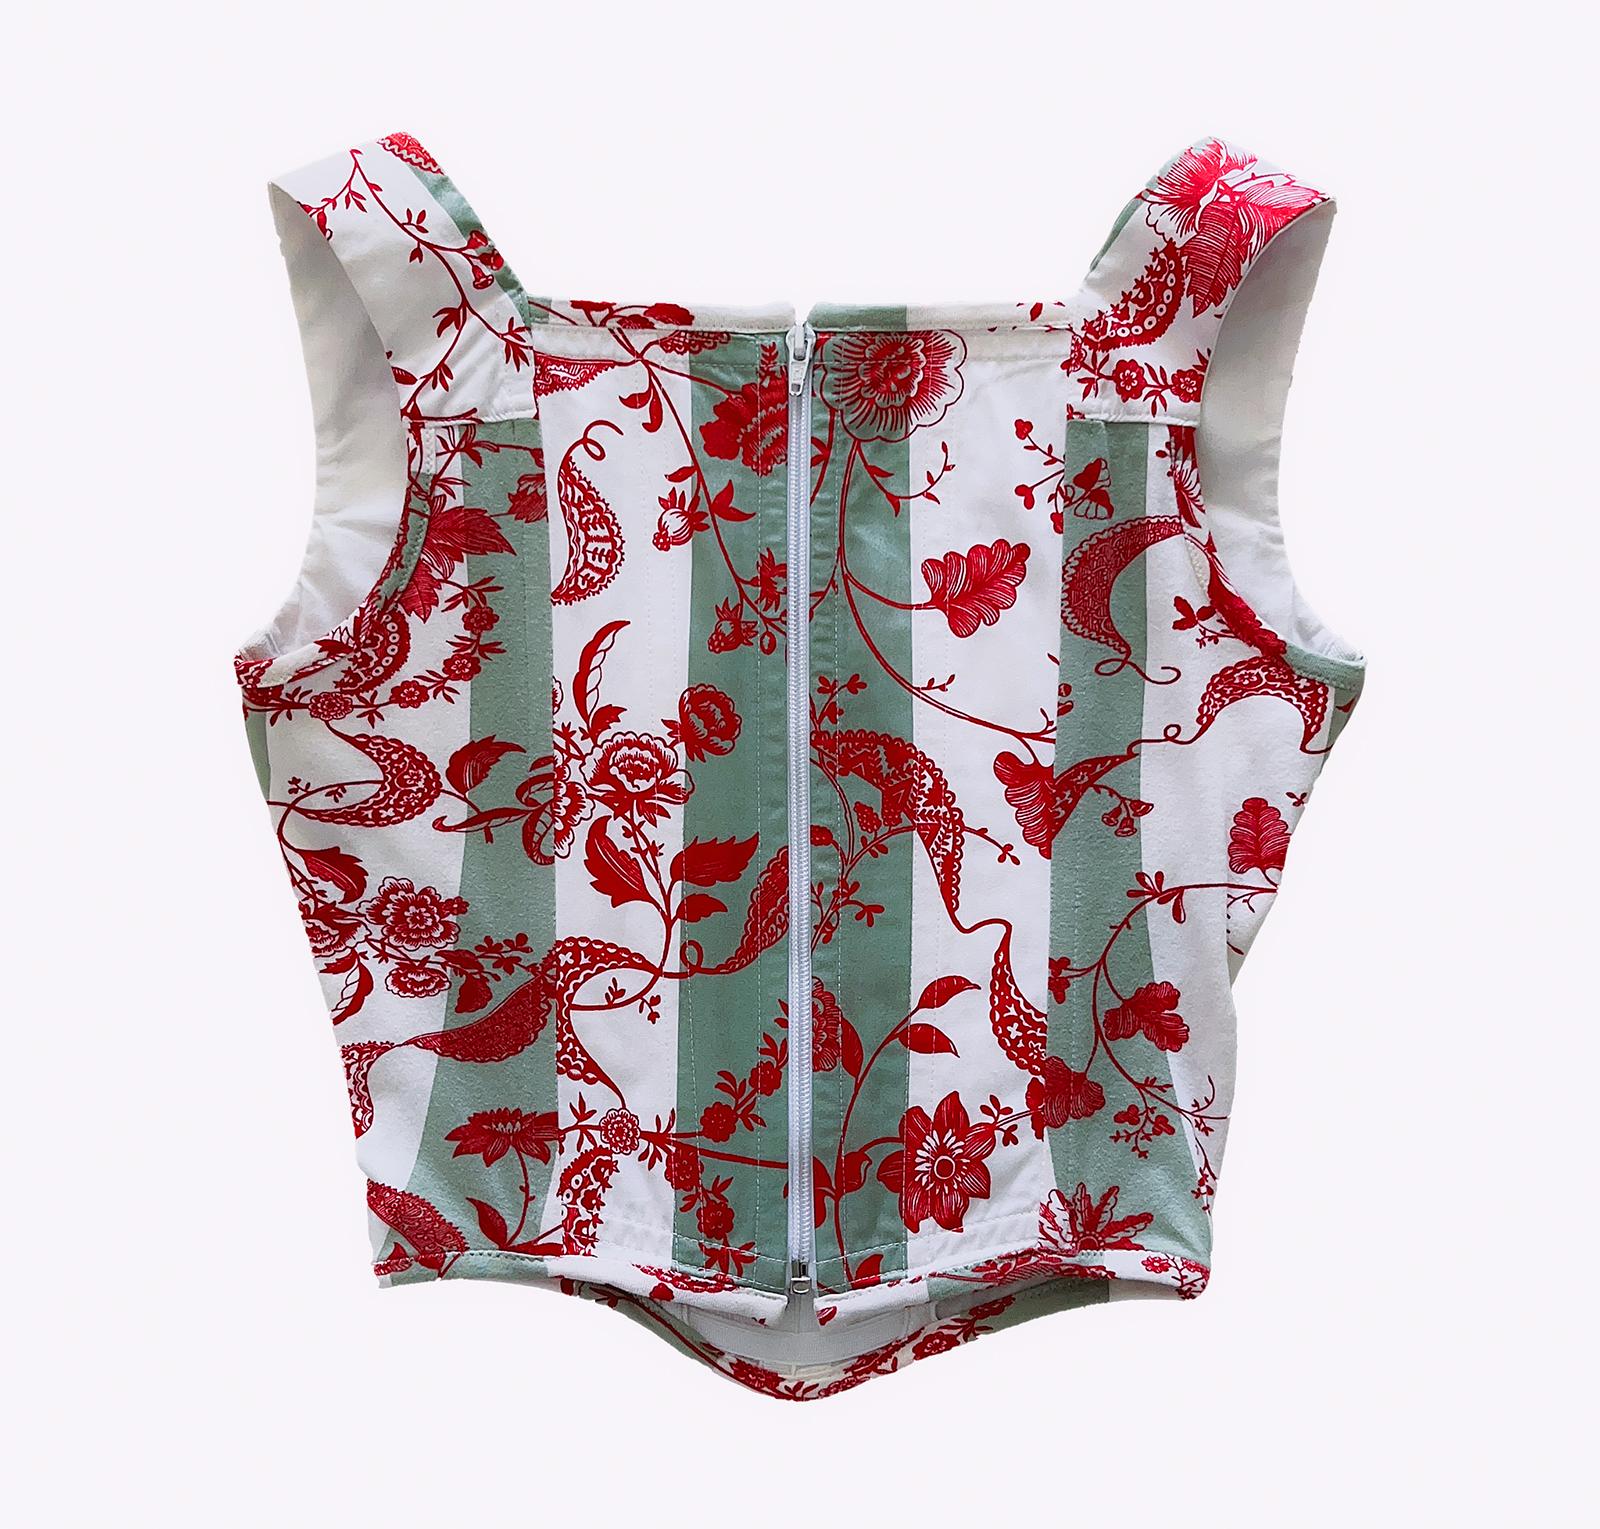 Vivienne Westwood Corset Iconic Rare 90s Red Label For Sale 3